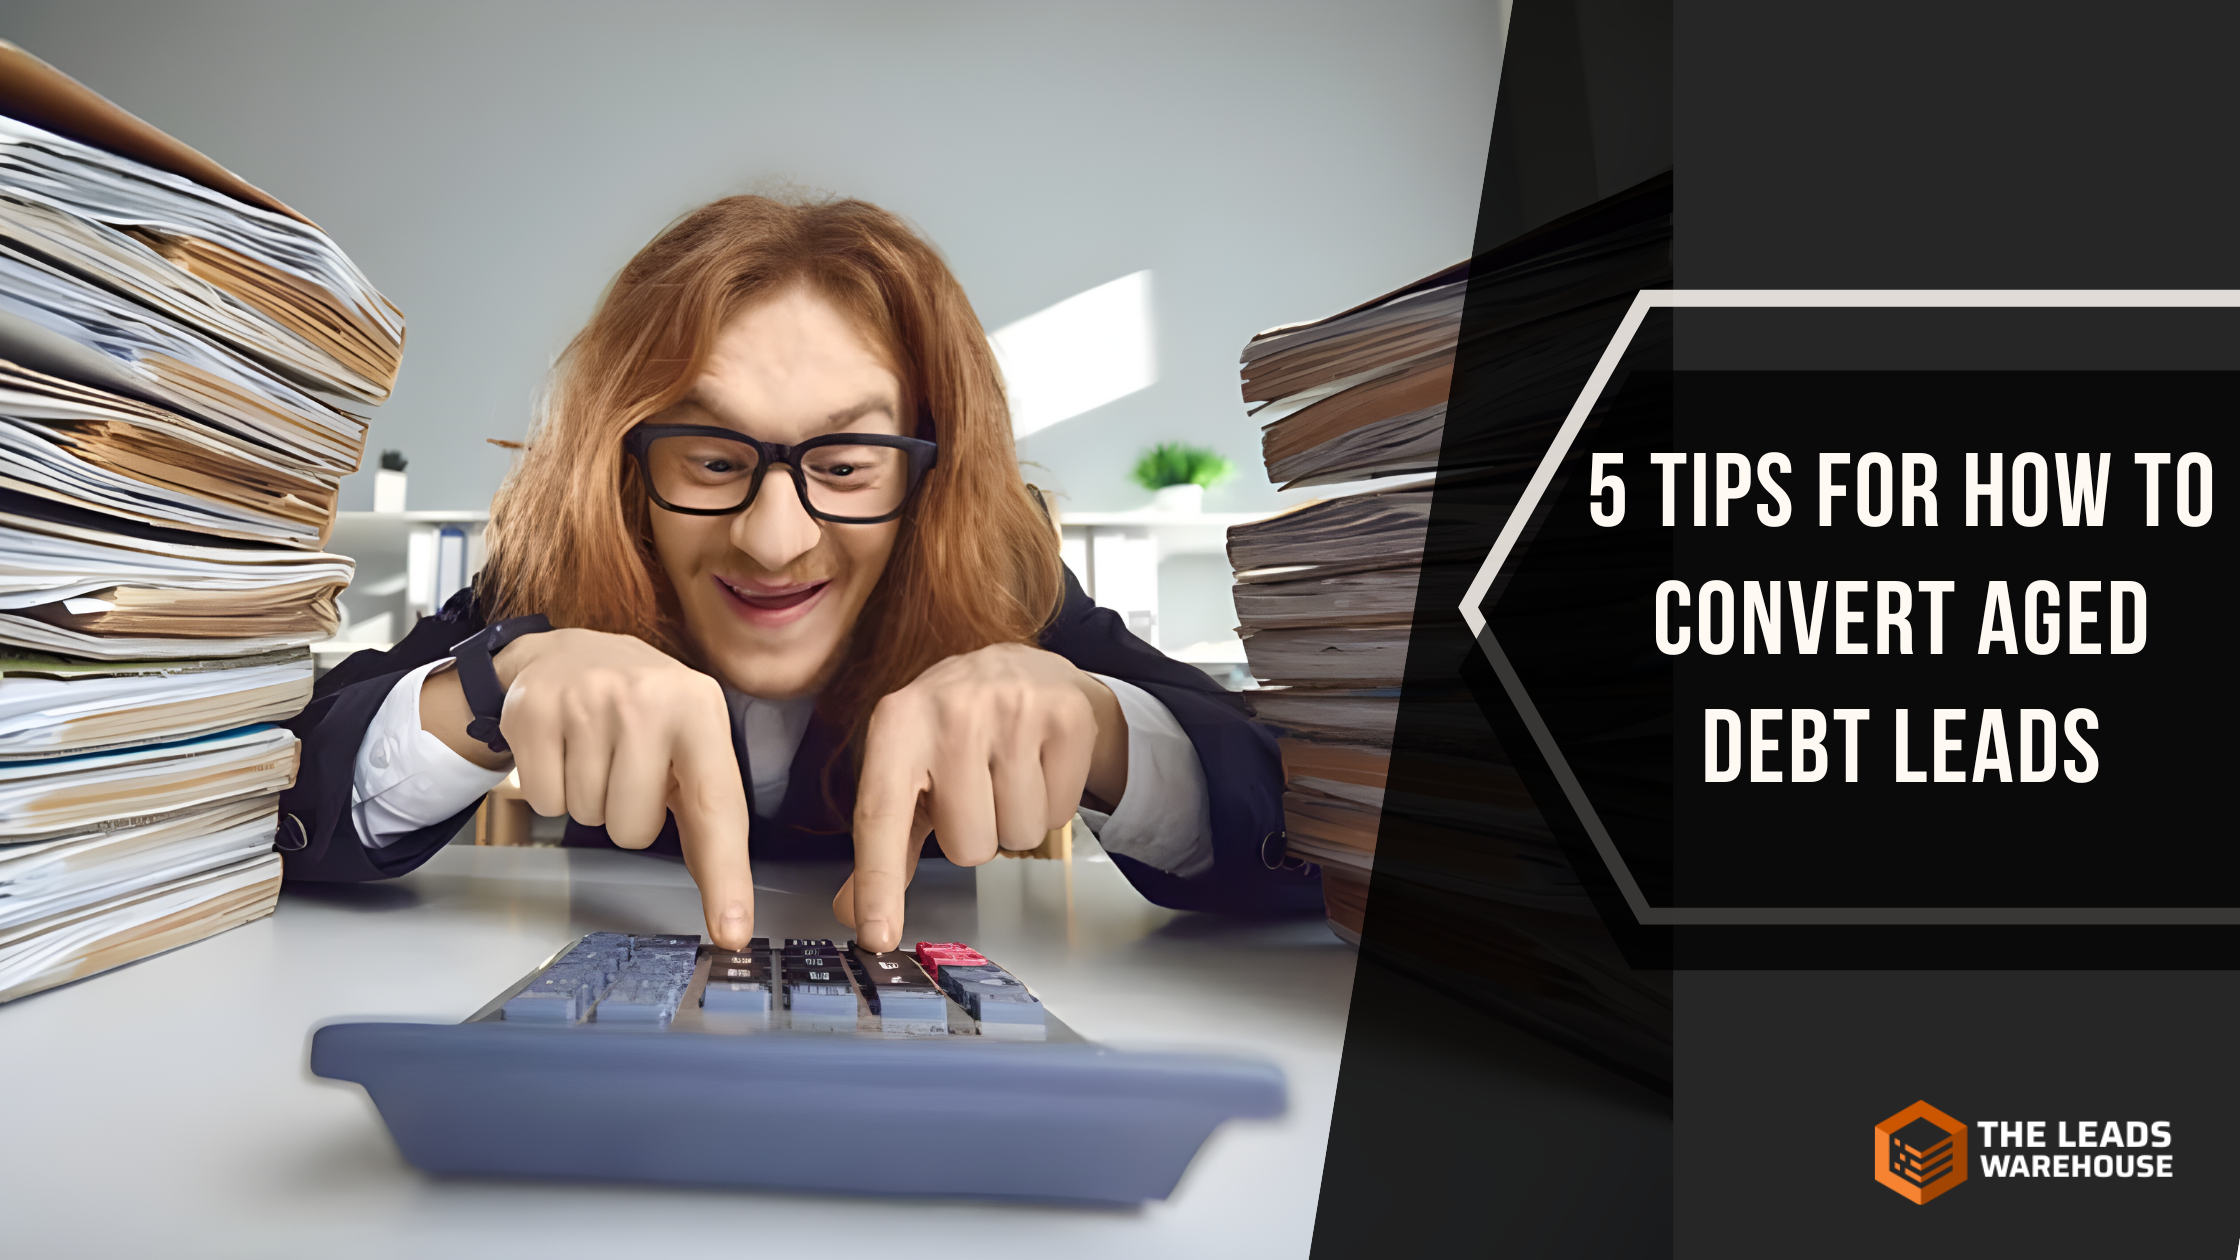 Convert Aged Debt Leads | 5 Tips